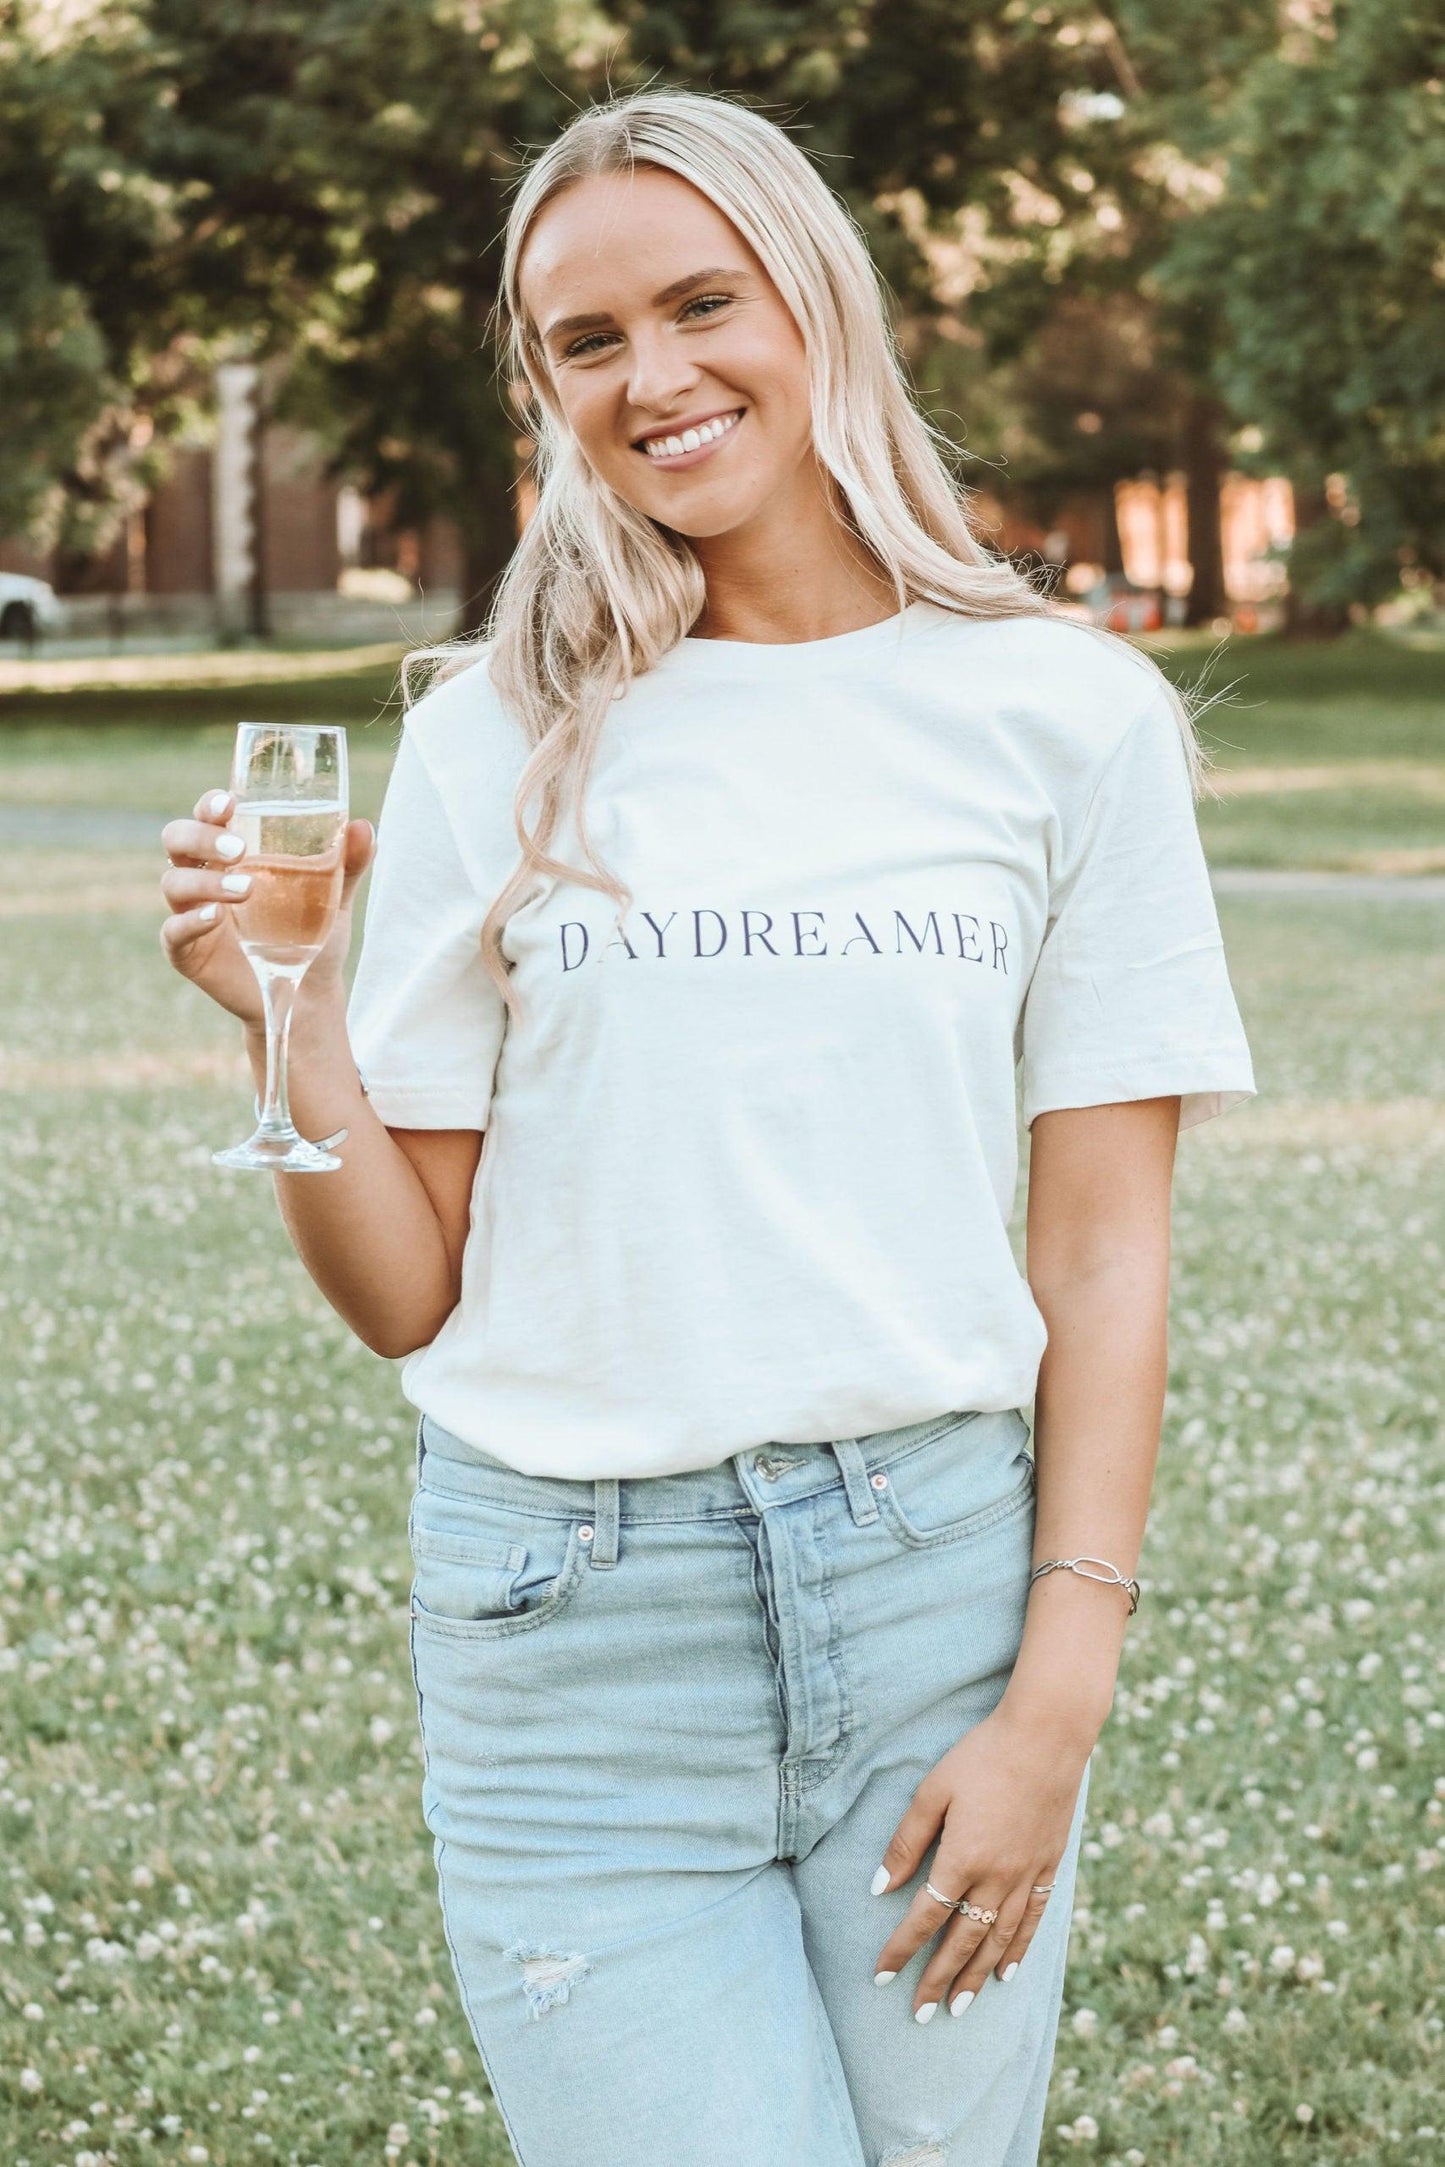 a photo of a girl in a park wearing a white t-shirt with daydreamer written in a modern deco font. She is smiling and holding a glass of champagne